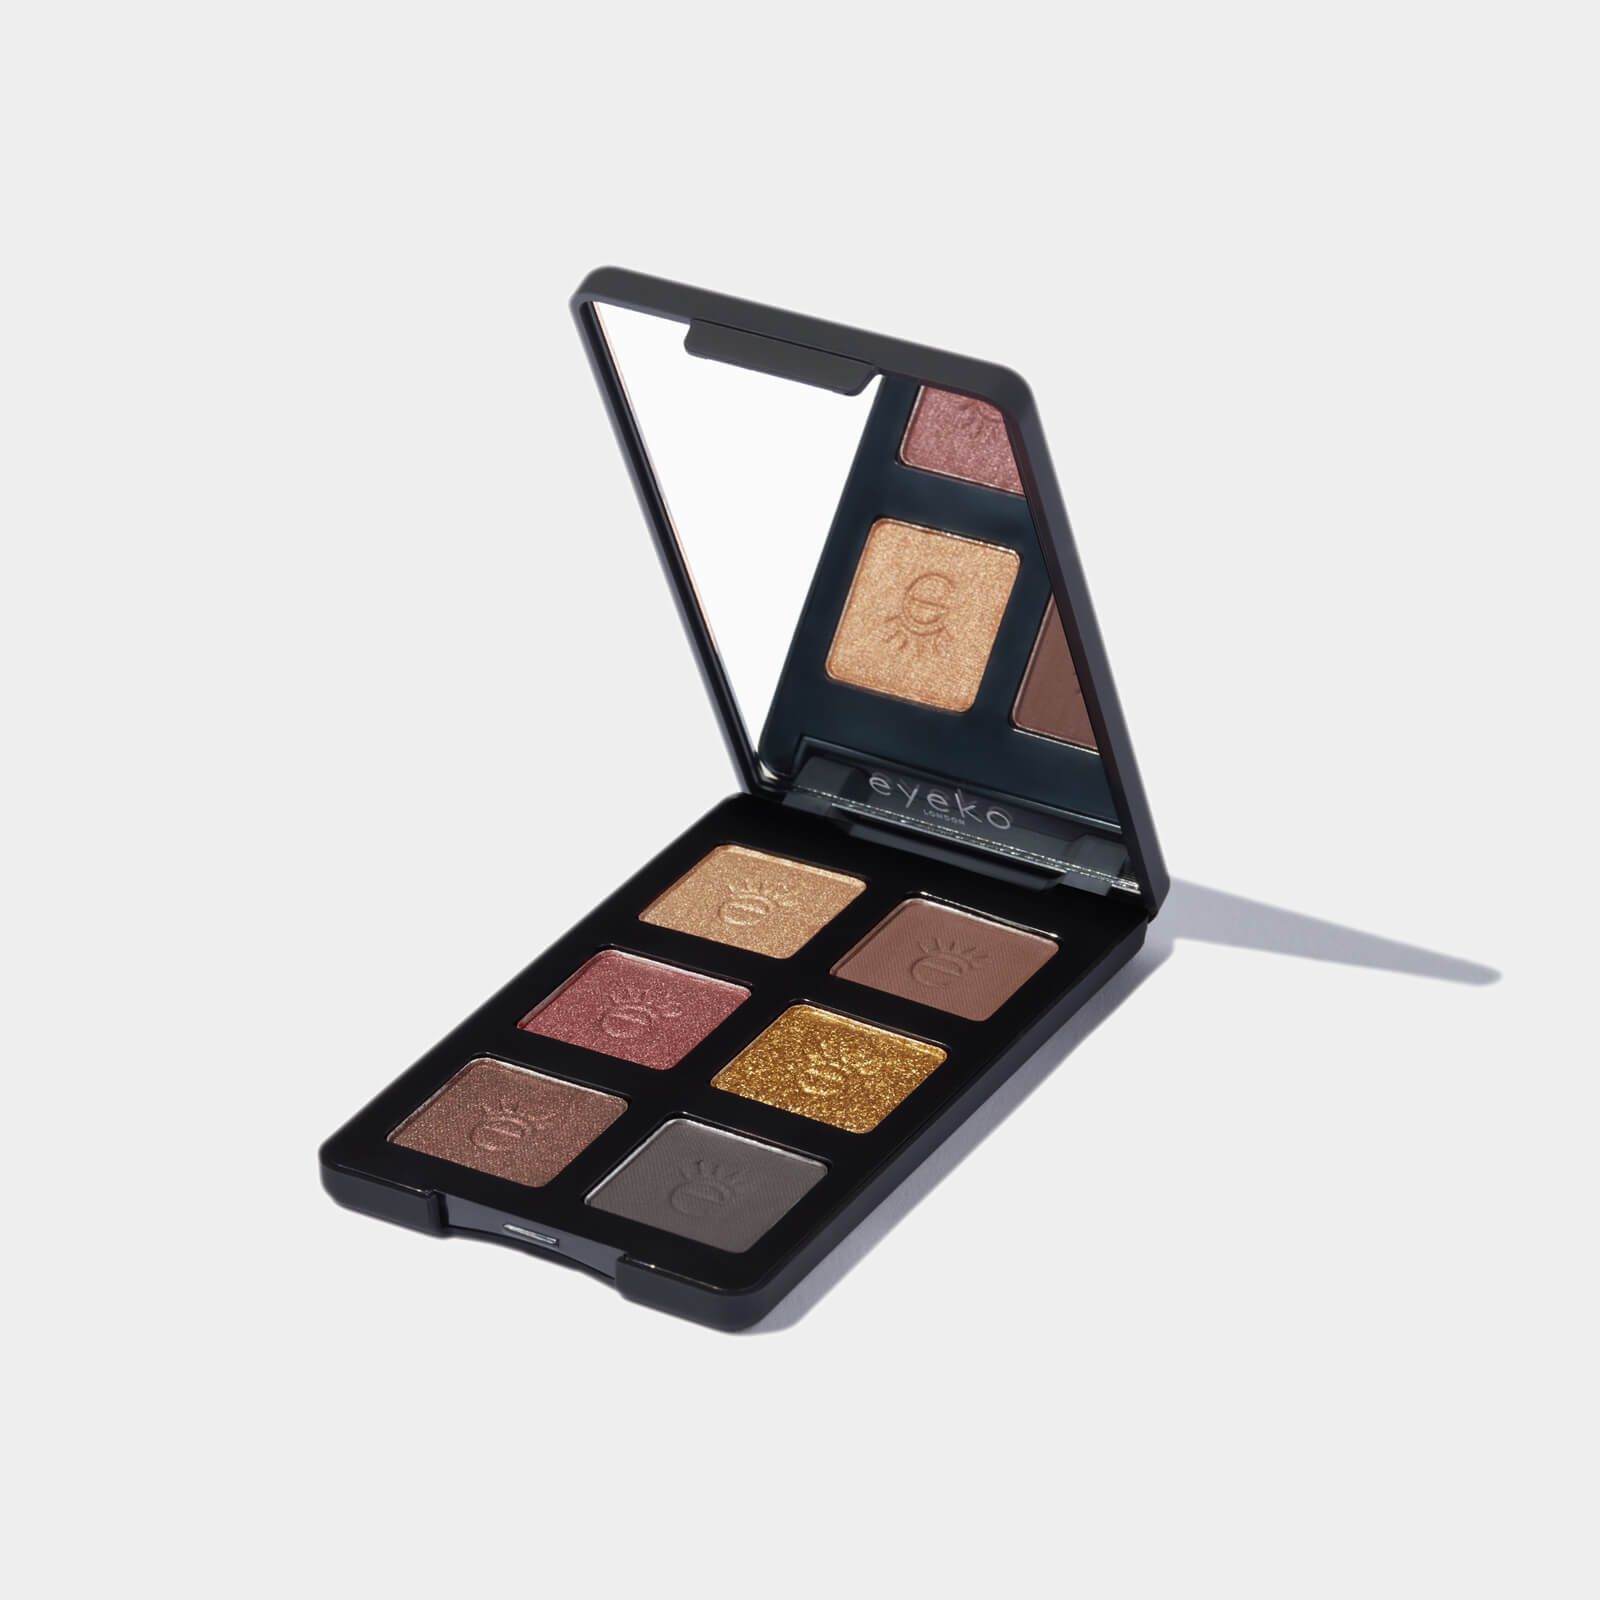 Image of Palette Ombretti Limitless Eyeko 3